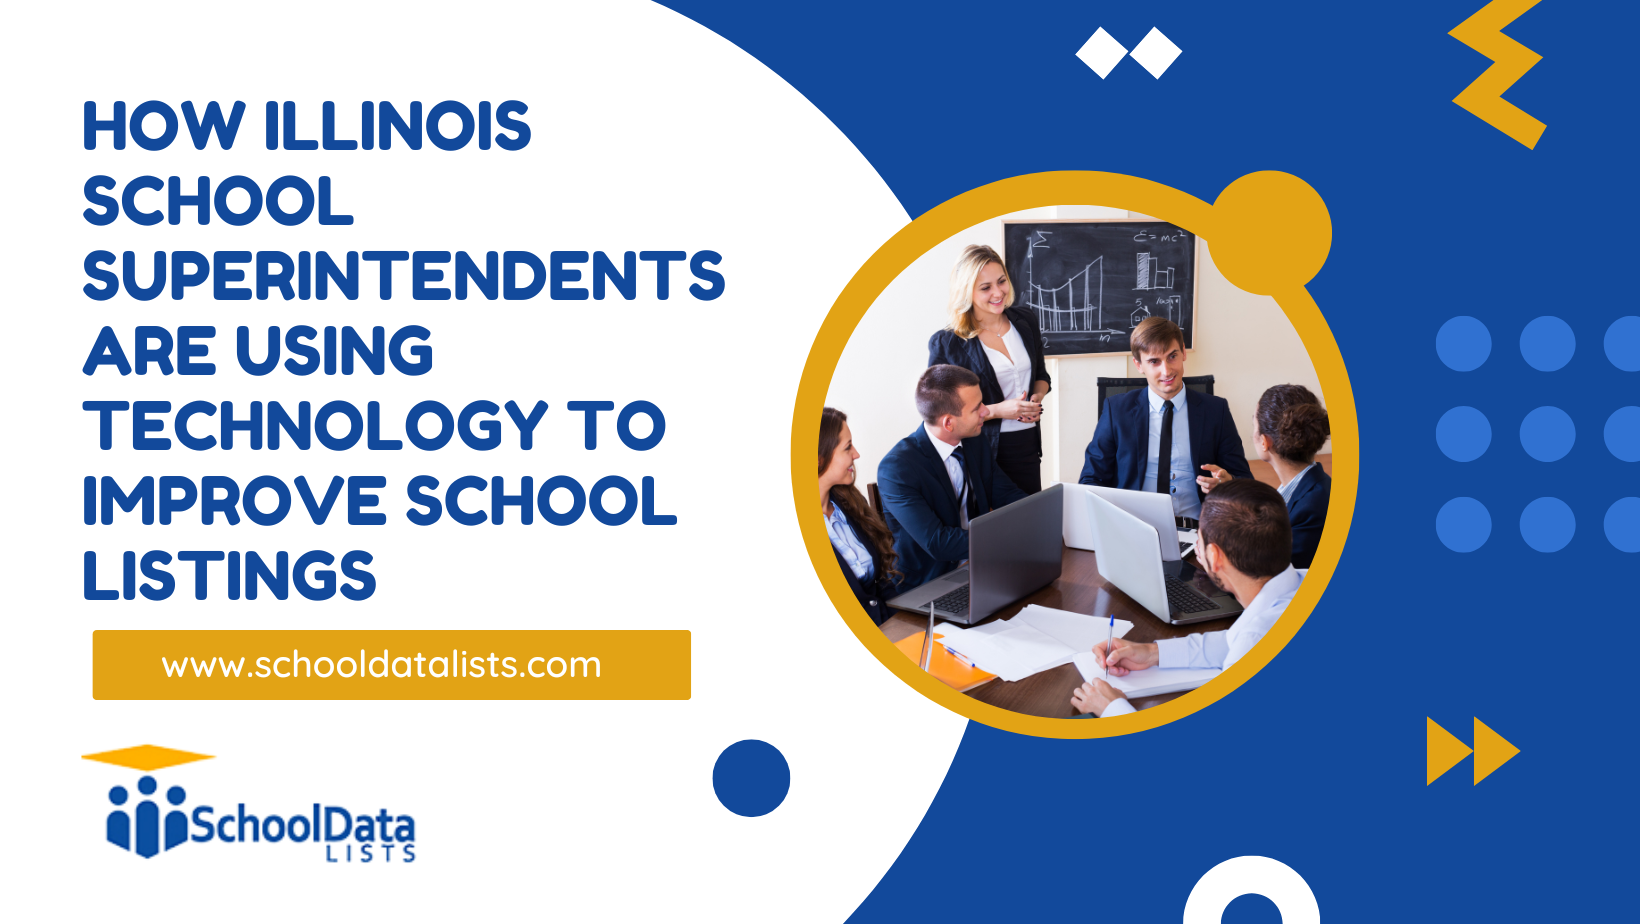 How Illinois School Superintendents Are Using Technology to Improve School Listings